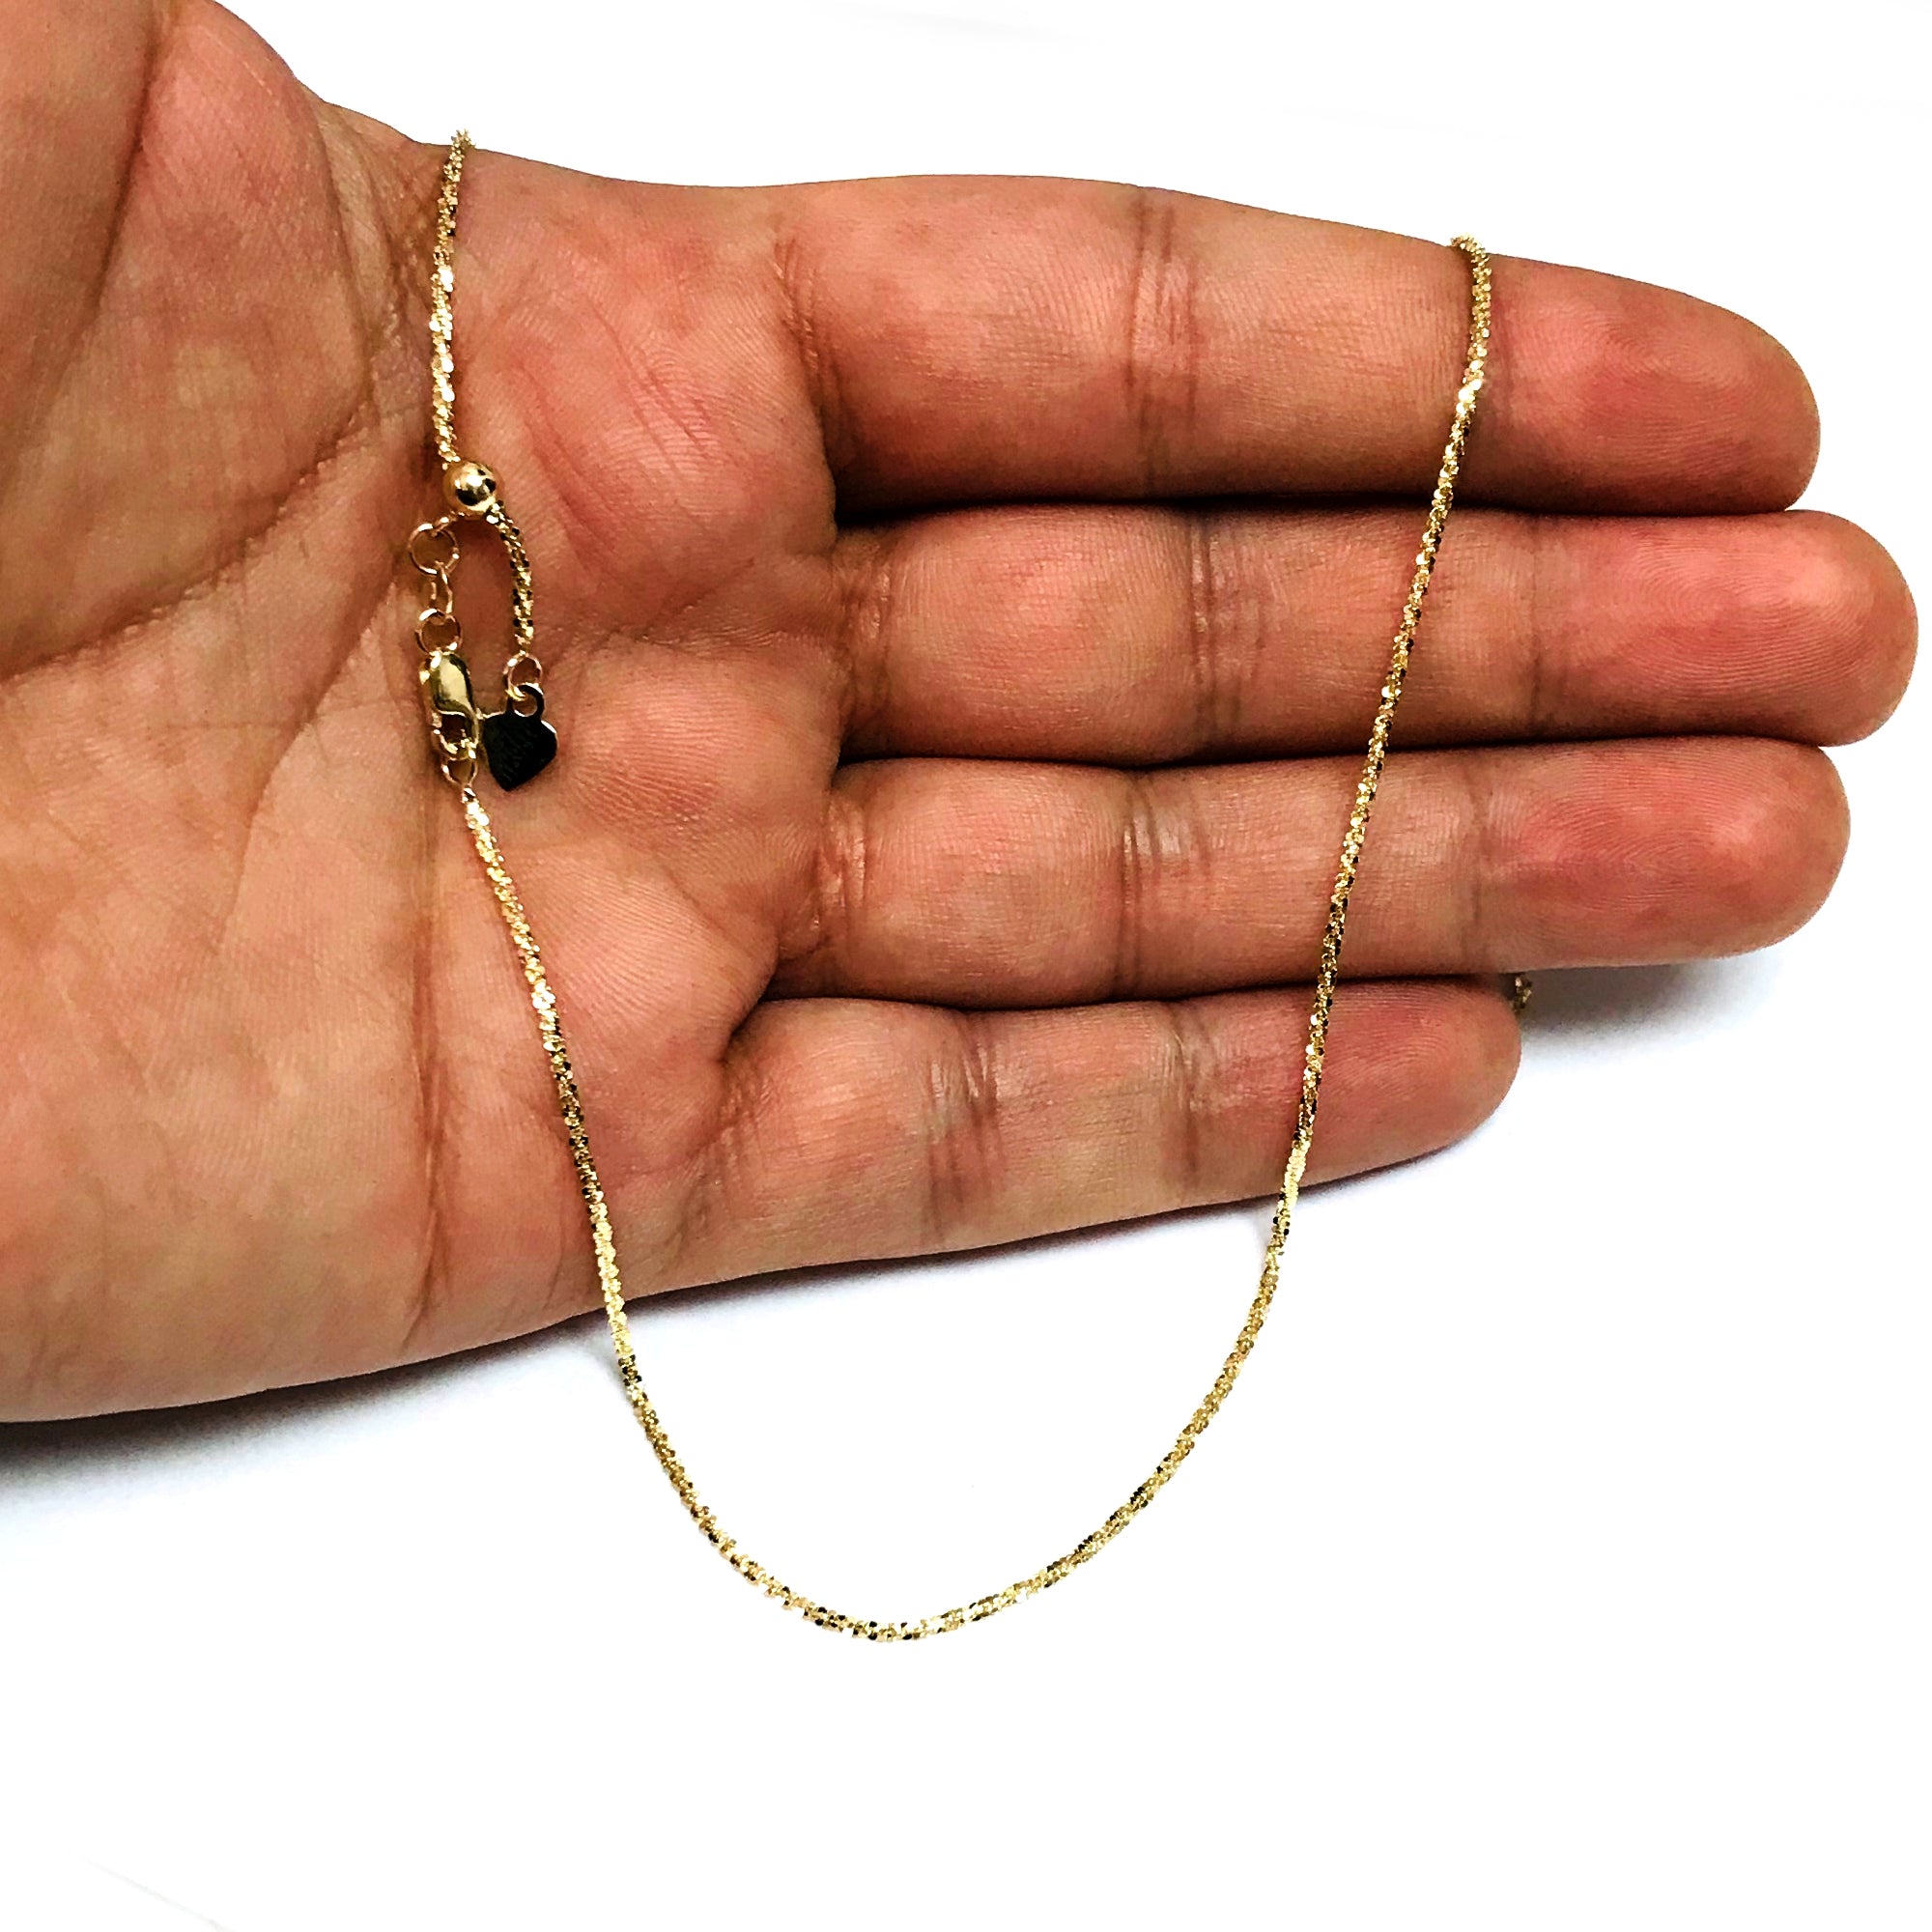 14k Yellow Gold Adjustable Sparkle Chain Necklace, 1.5mm, 22" fine designer jewelry for men and women